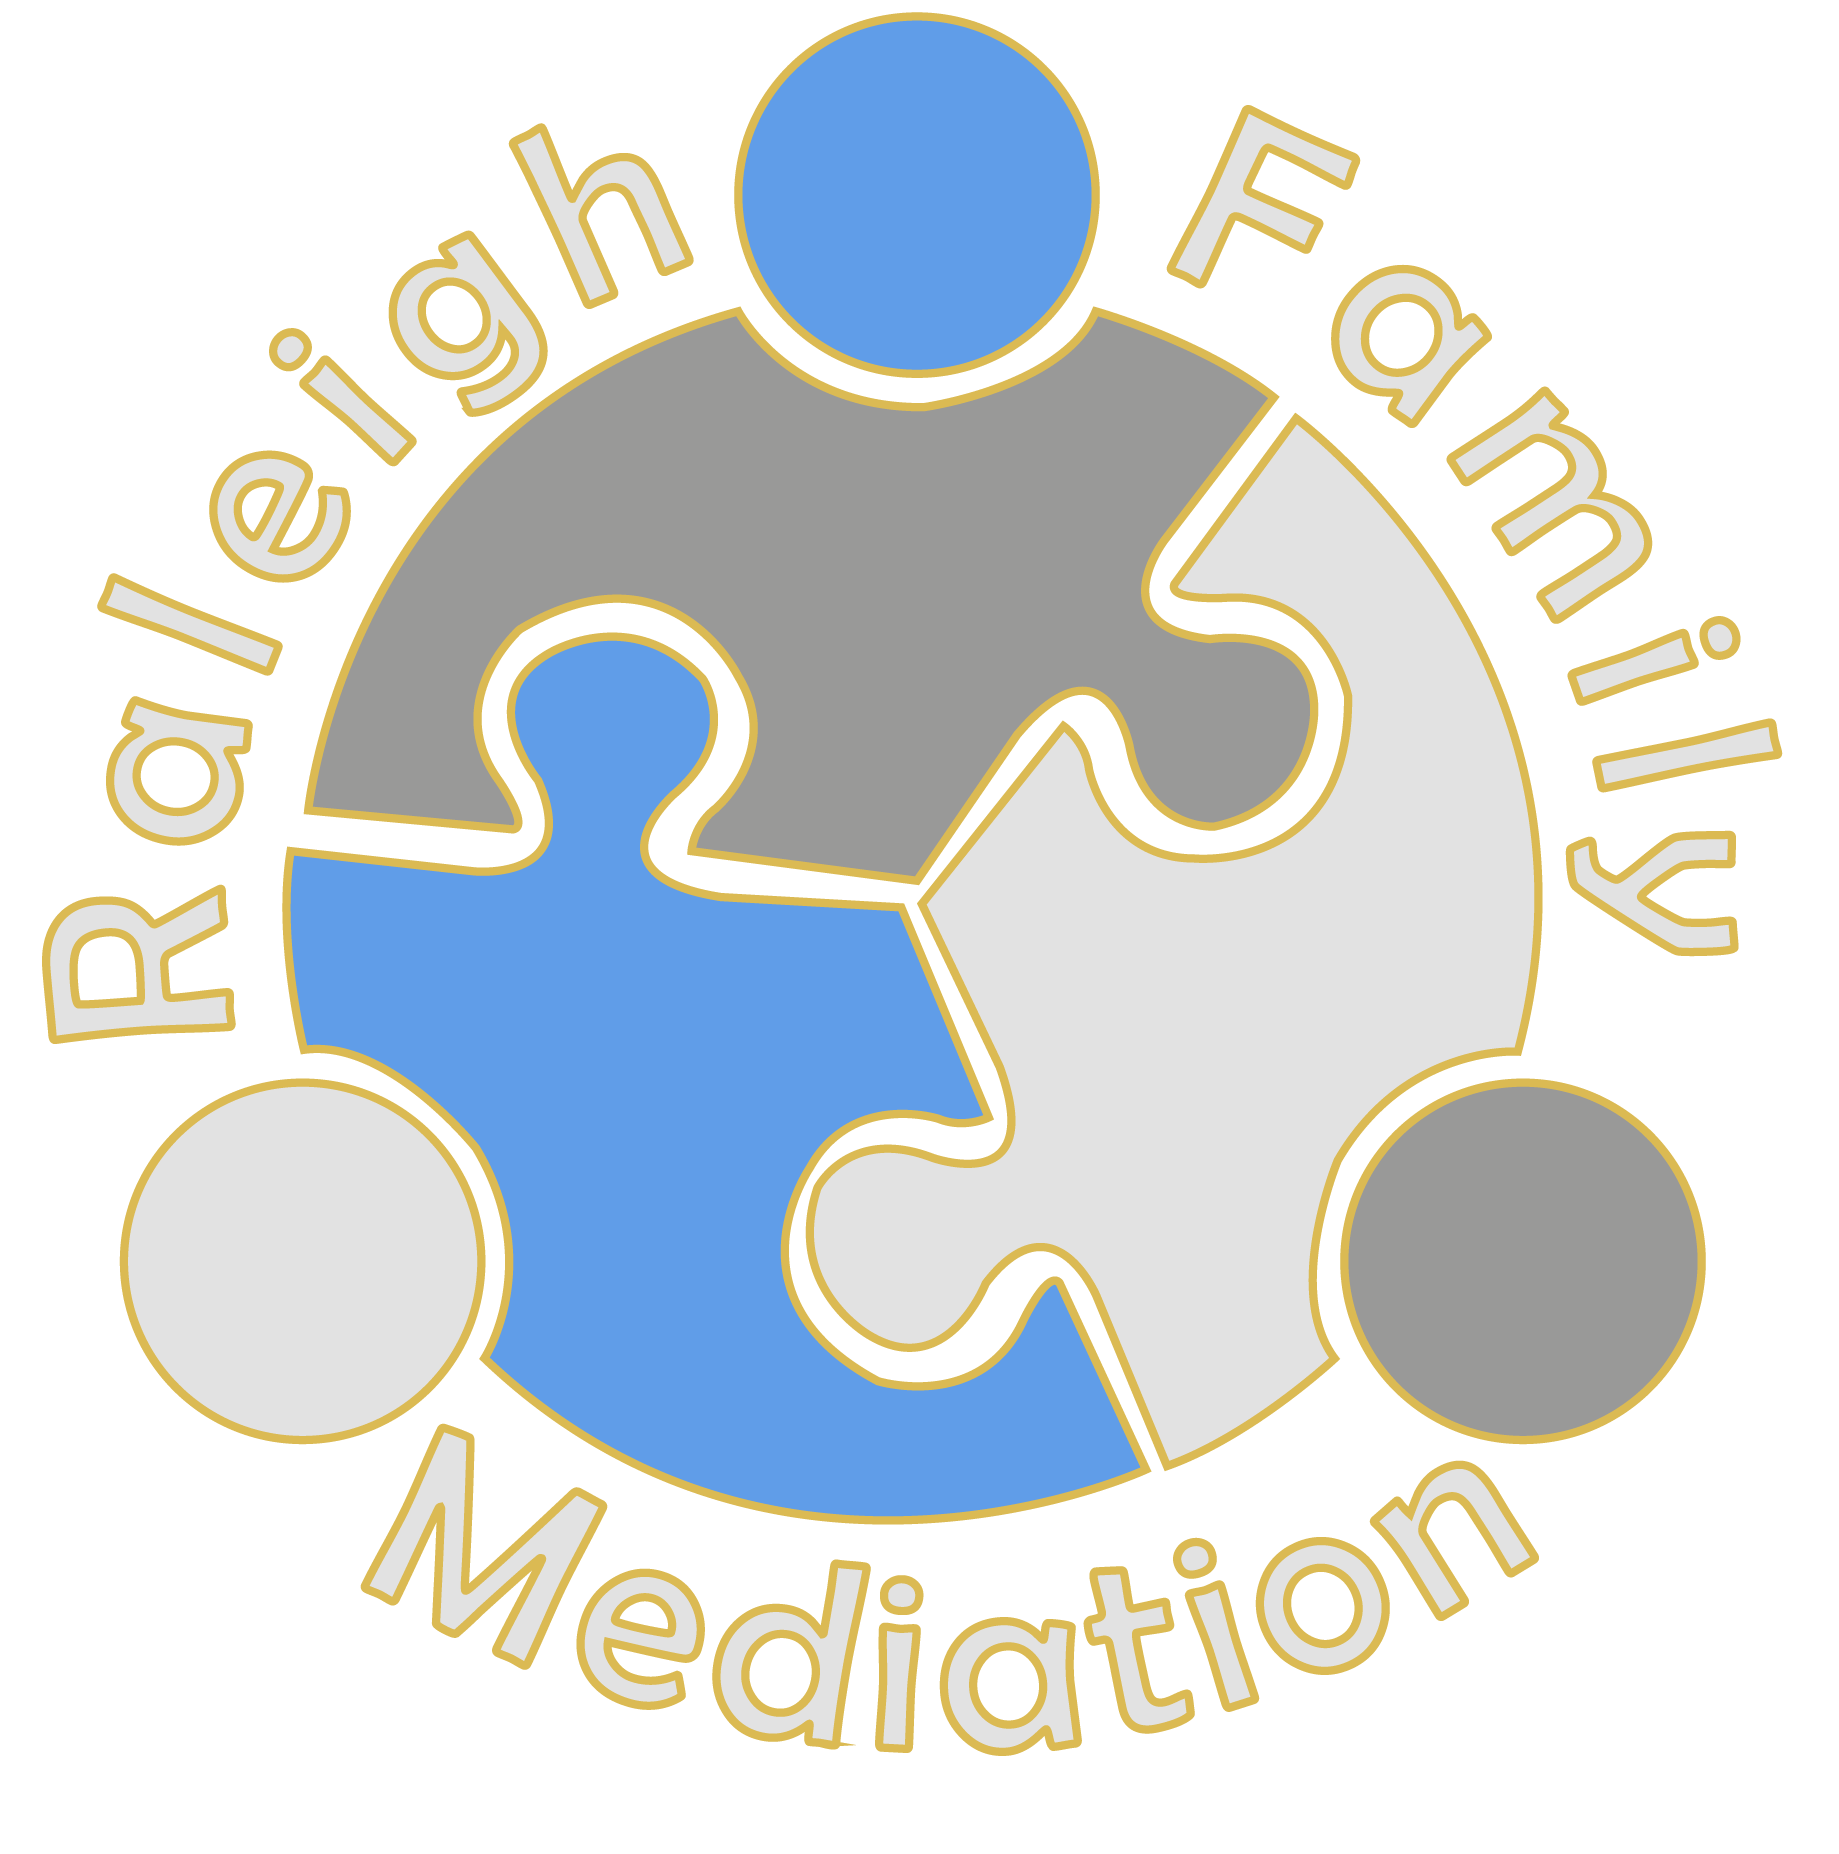 Raleigh Family Mediation The Law Corner Family Law Divorce Child Custody Mediation Domestic Violence Estate Will Help Raleigh  Durham Cary Wake Forest Garner Apex Clayton